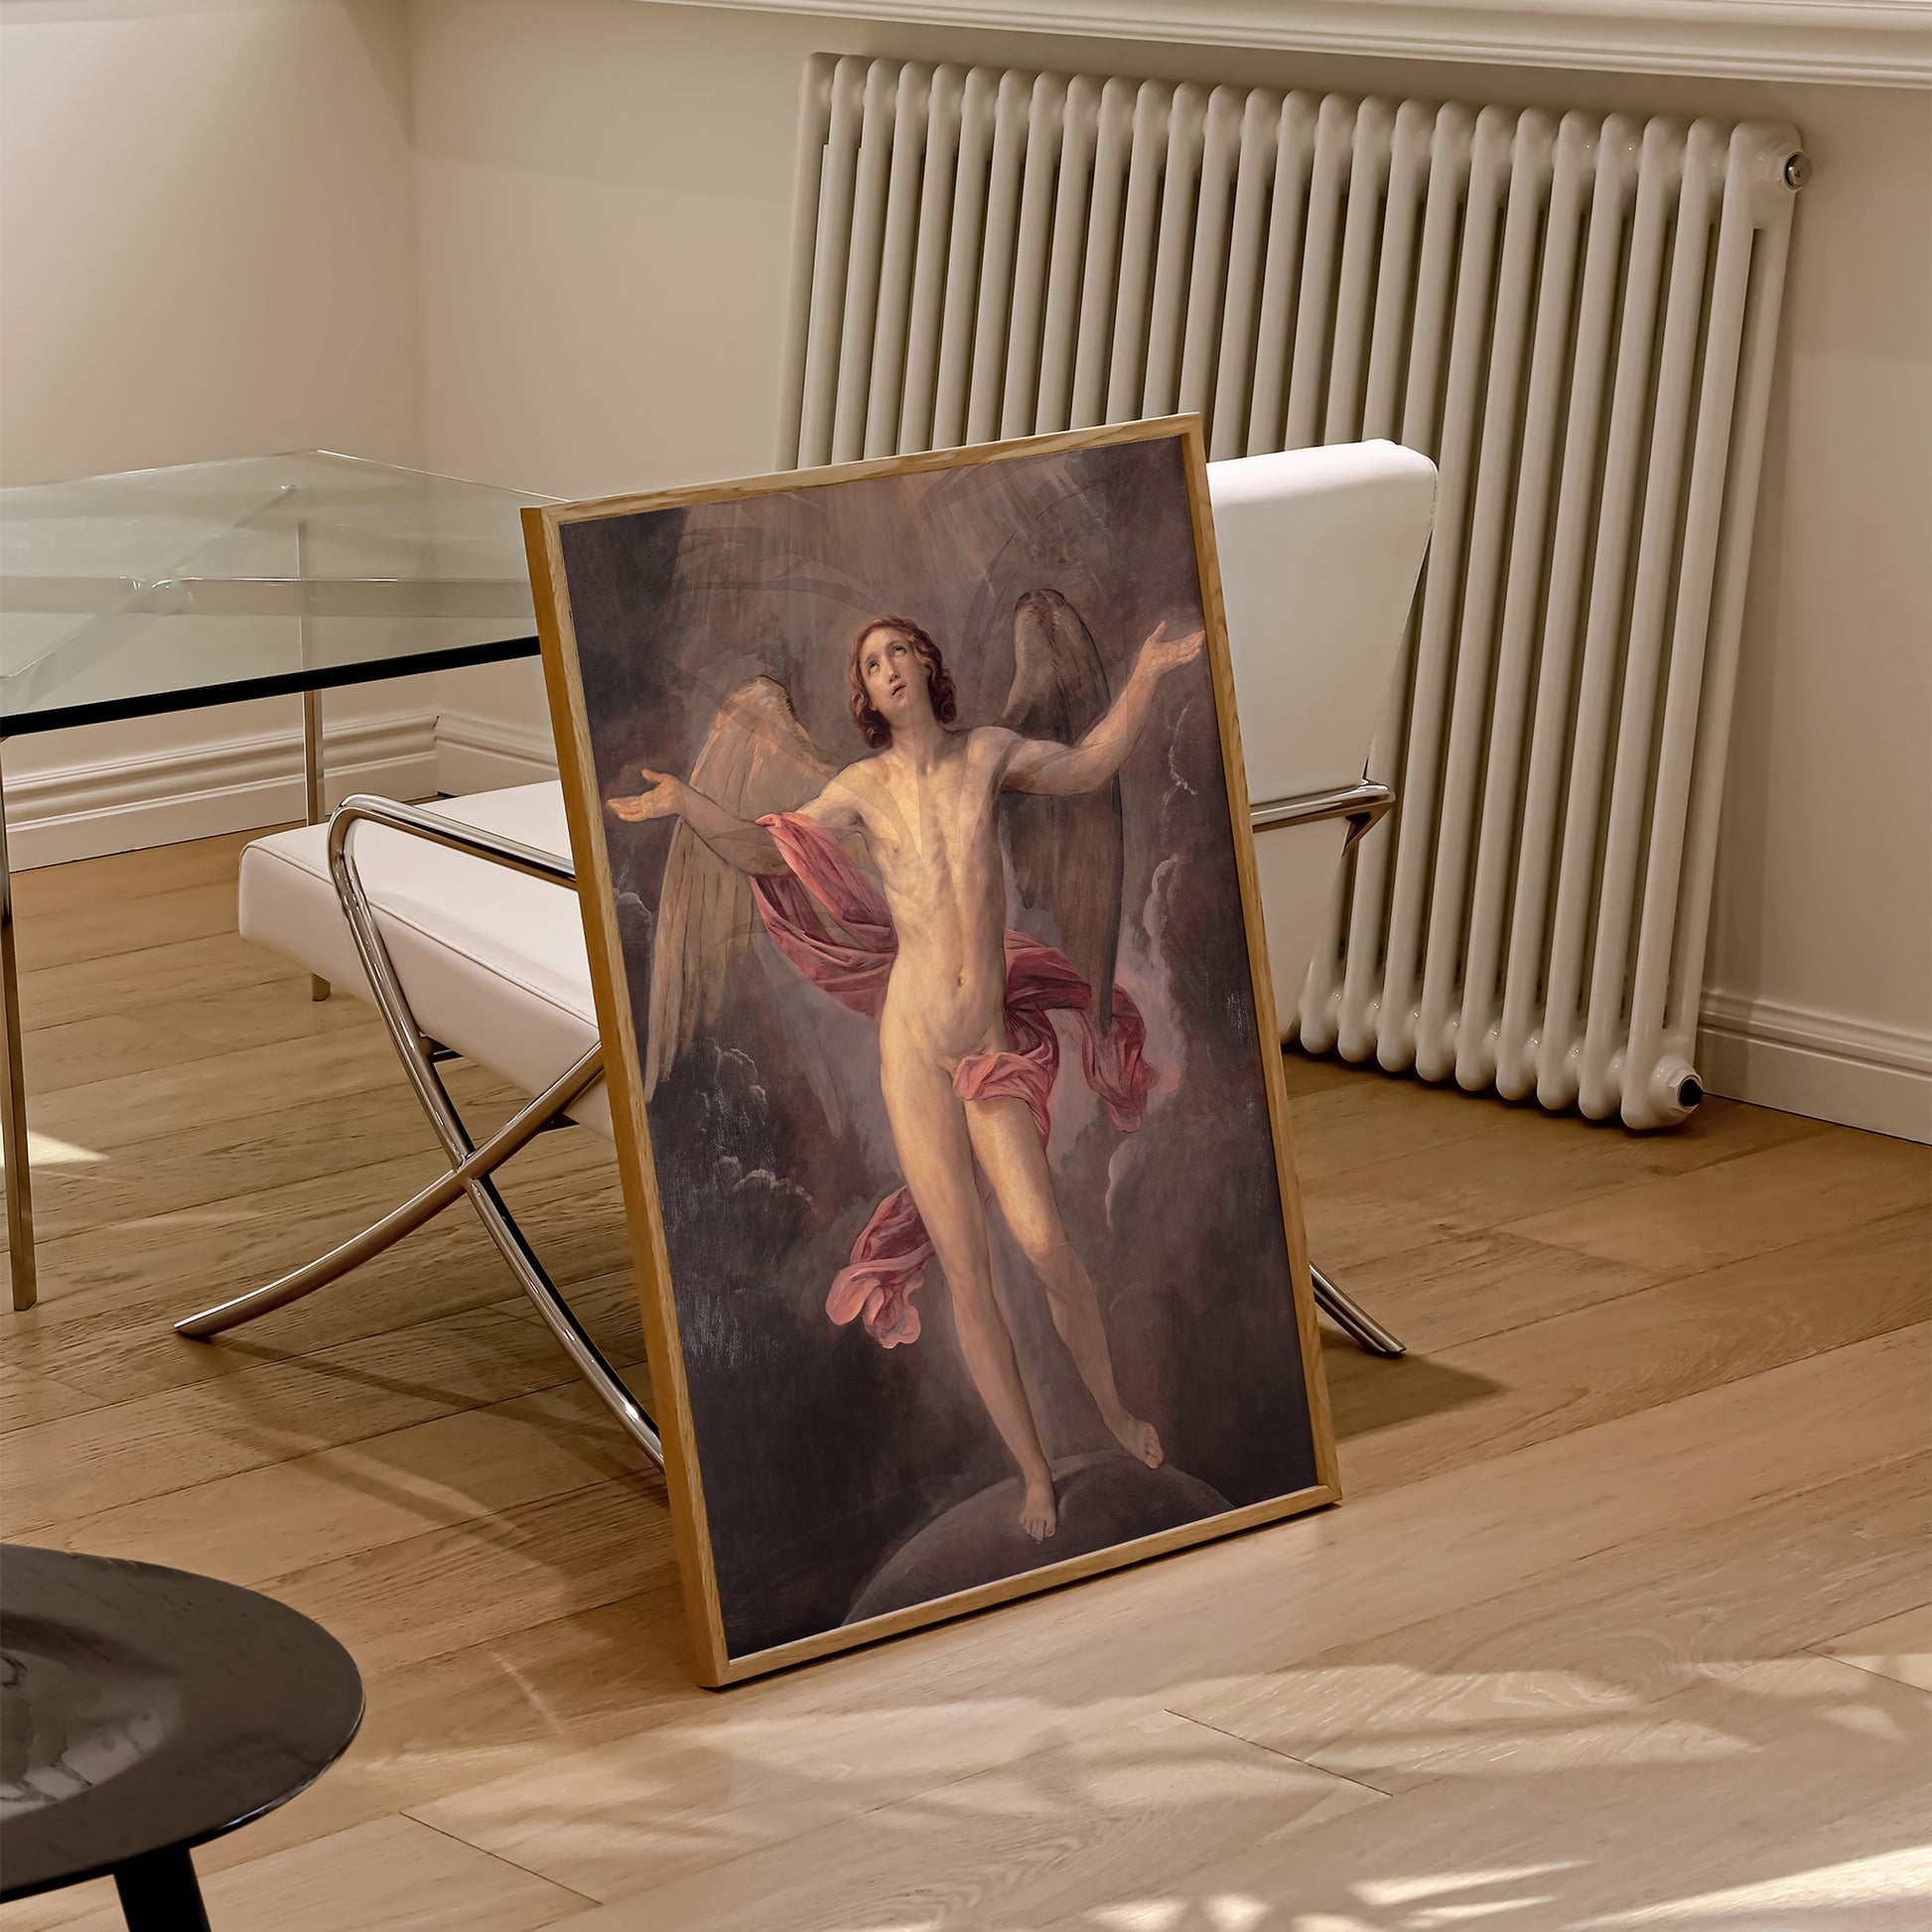 Be inspired by our classic art print Blessed Soul by Guido Reni. This artwork was printed using the giclée process on archival acid-free paper and is presented in a natural oak frame that captures its timeless beauty in every detail.